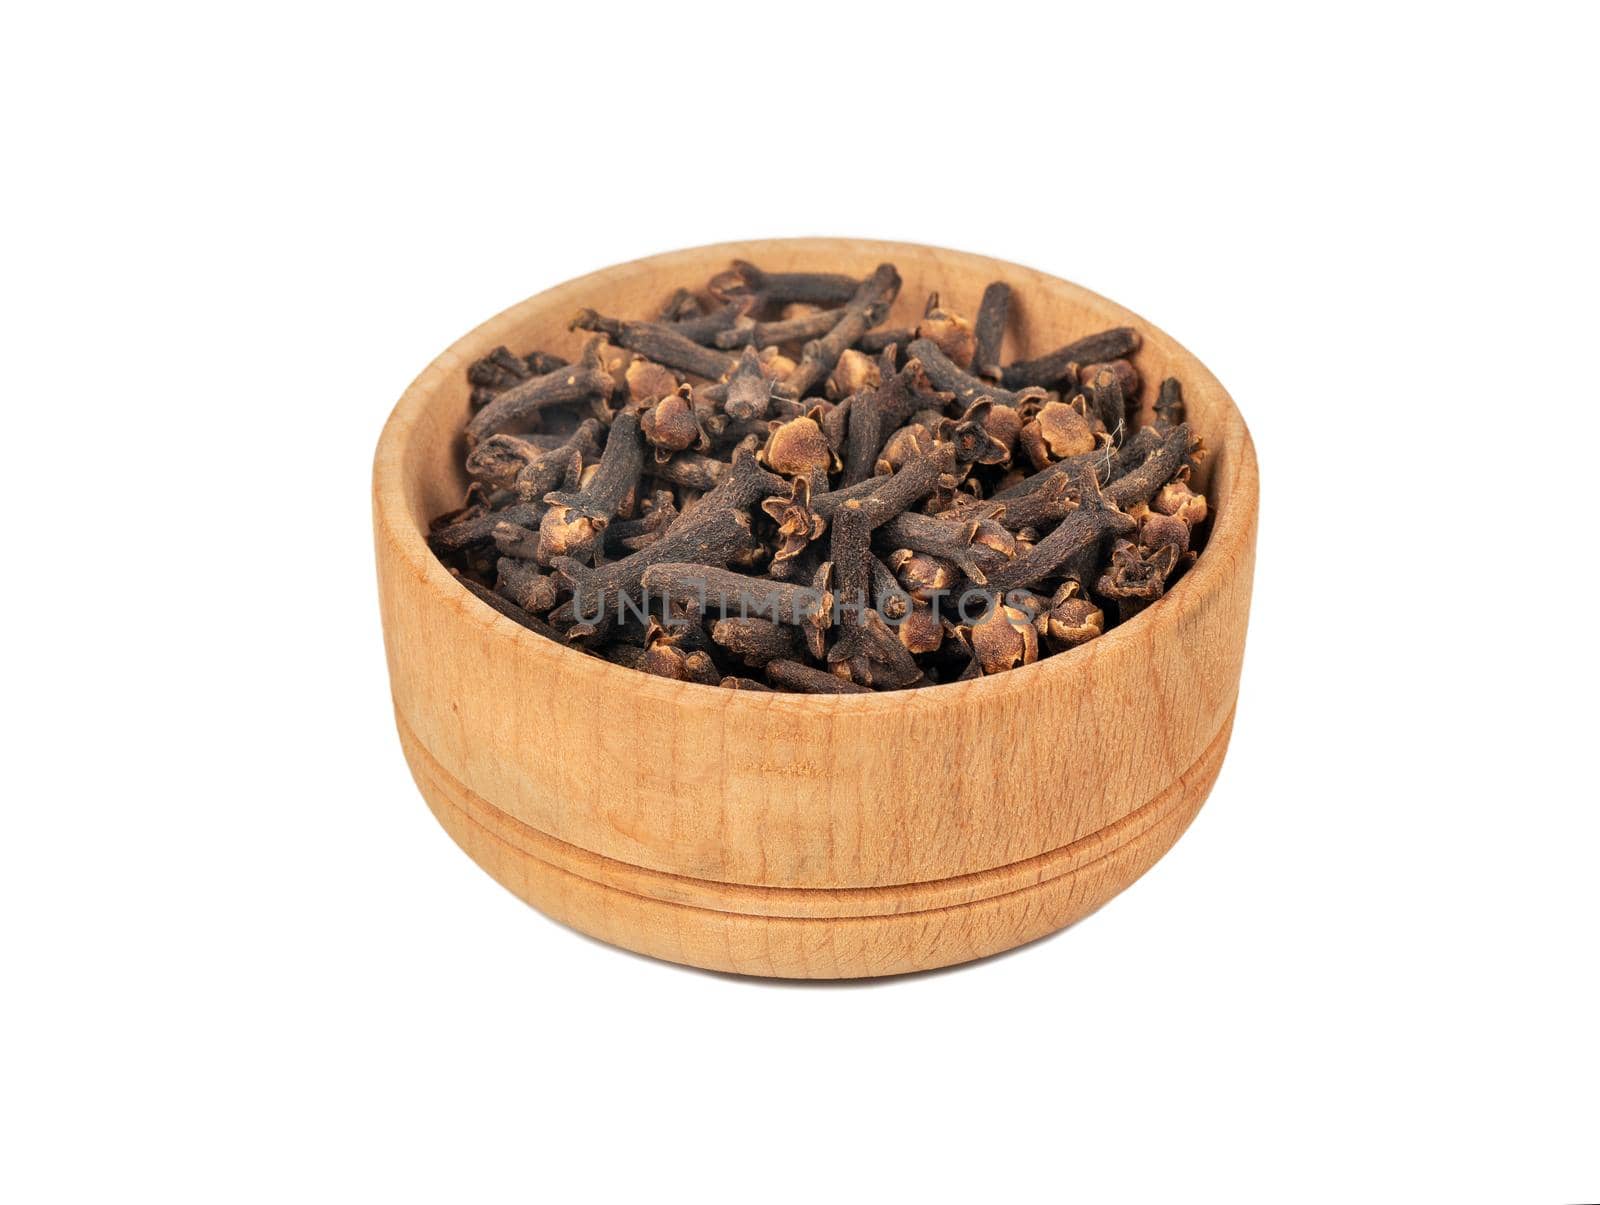 Dry cloves in wooden bowl isolated on white background